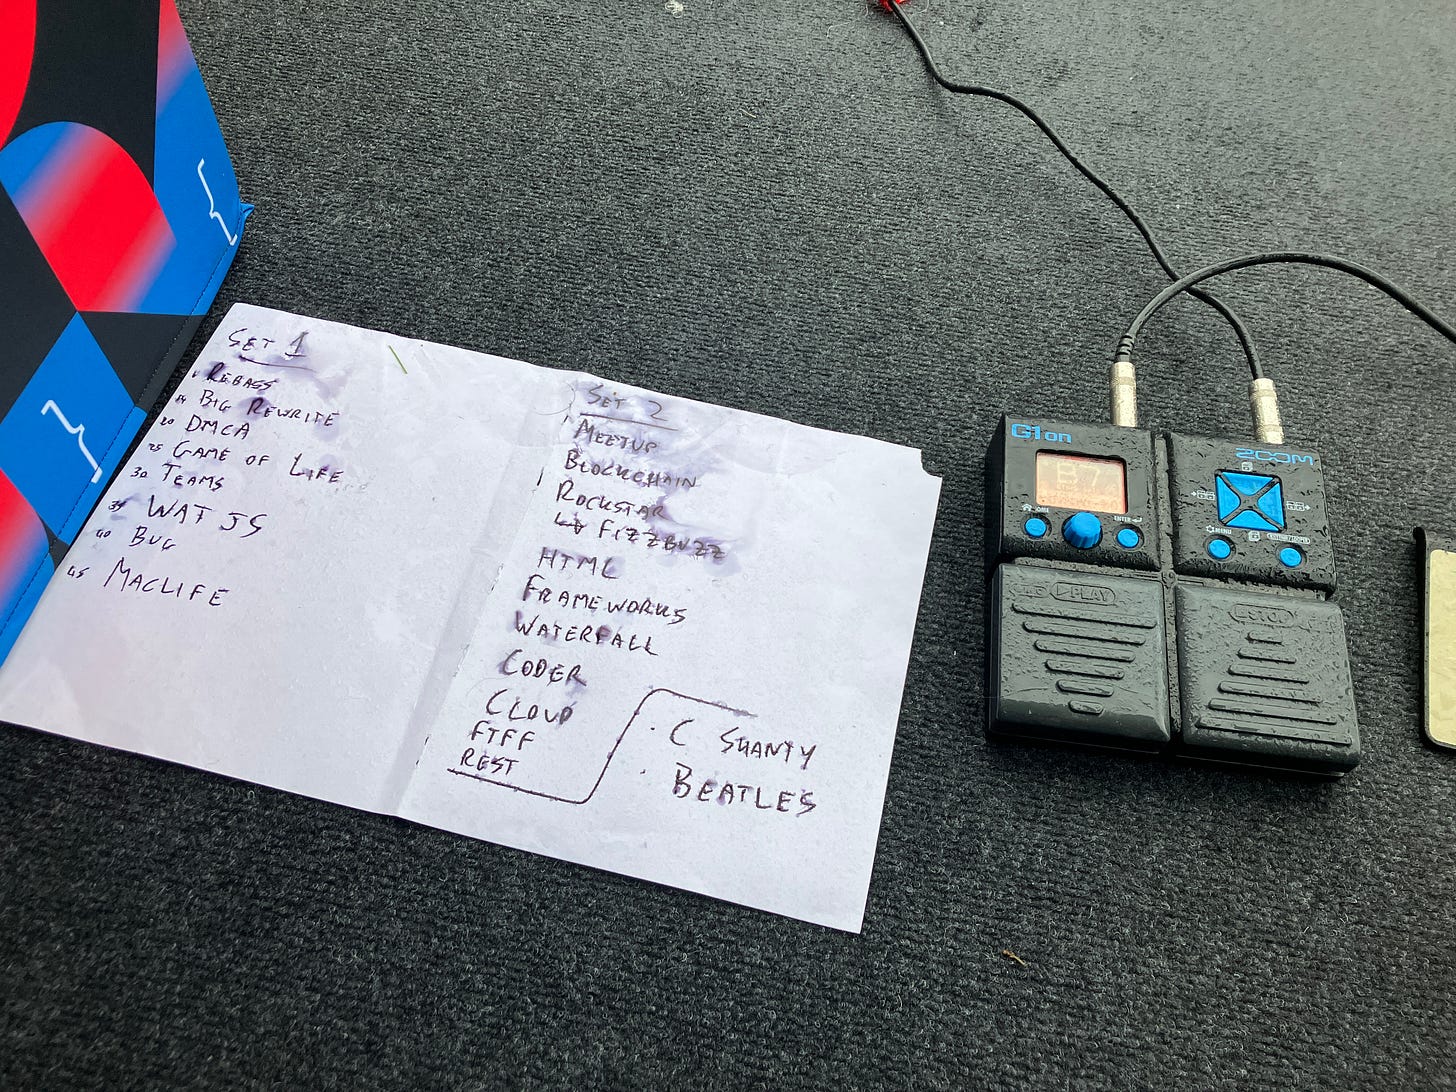 A handwritten set list next to a Zoom G1on guitar pedal. Both are soaked with rain.